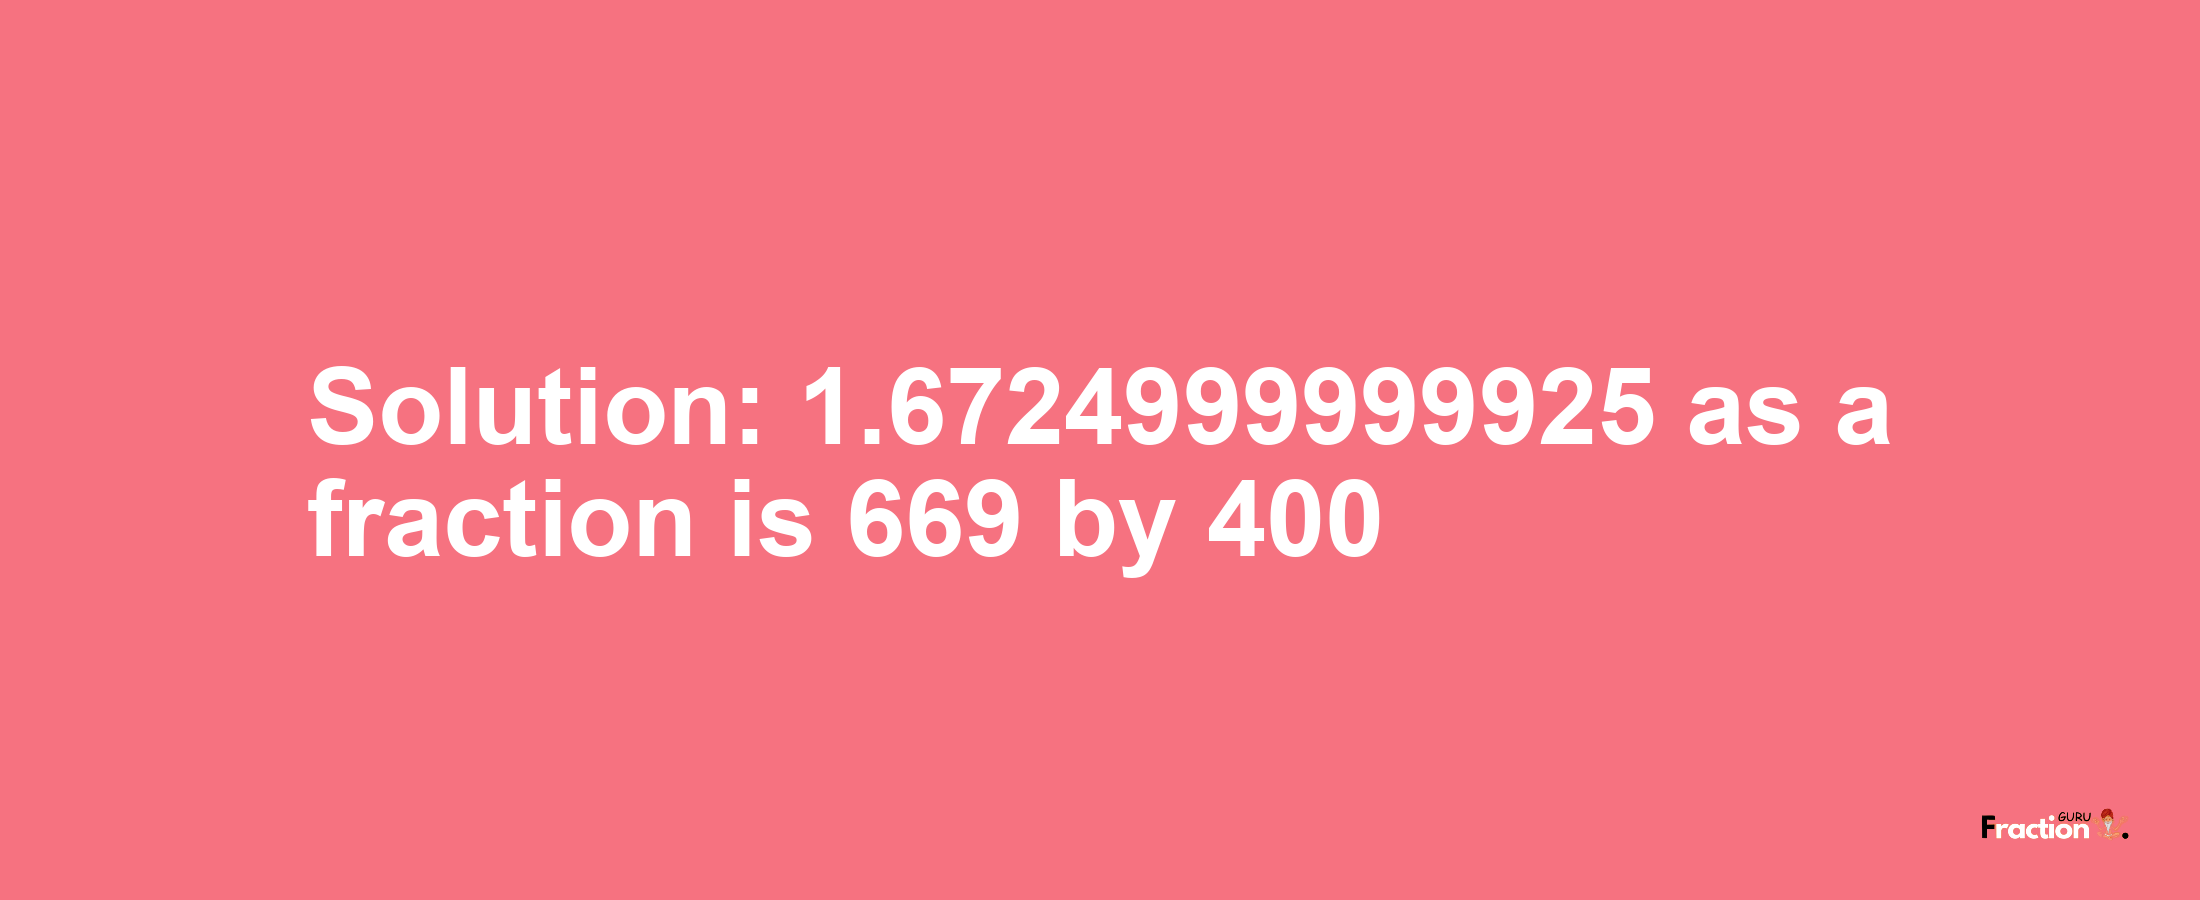 Solution:1.6724999999925 as a fraction is 669/400